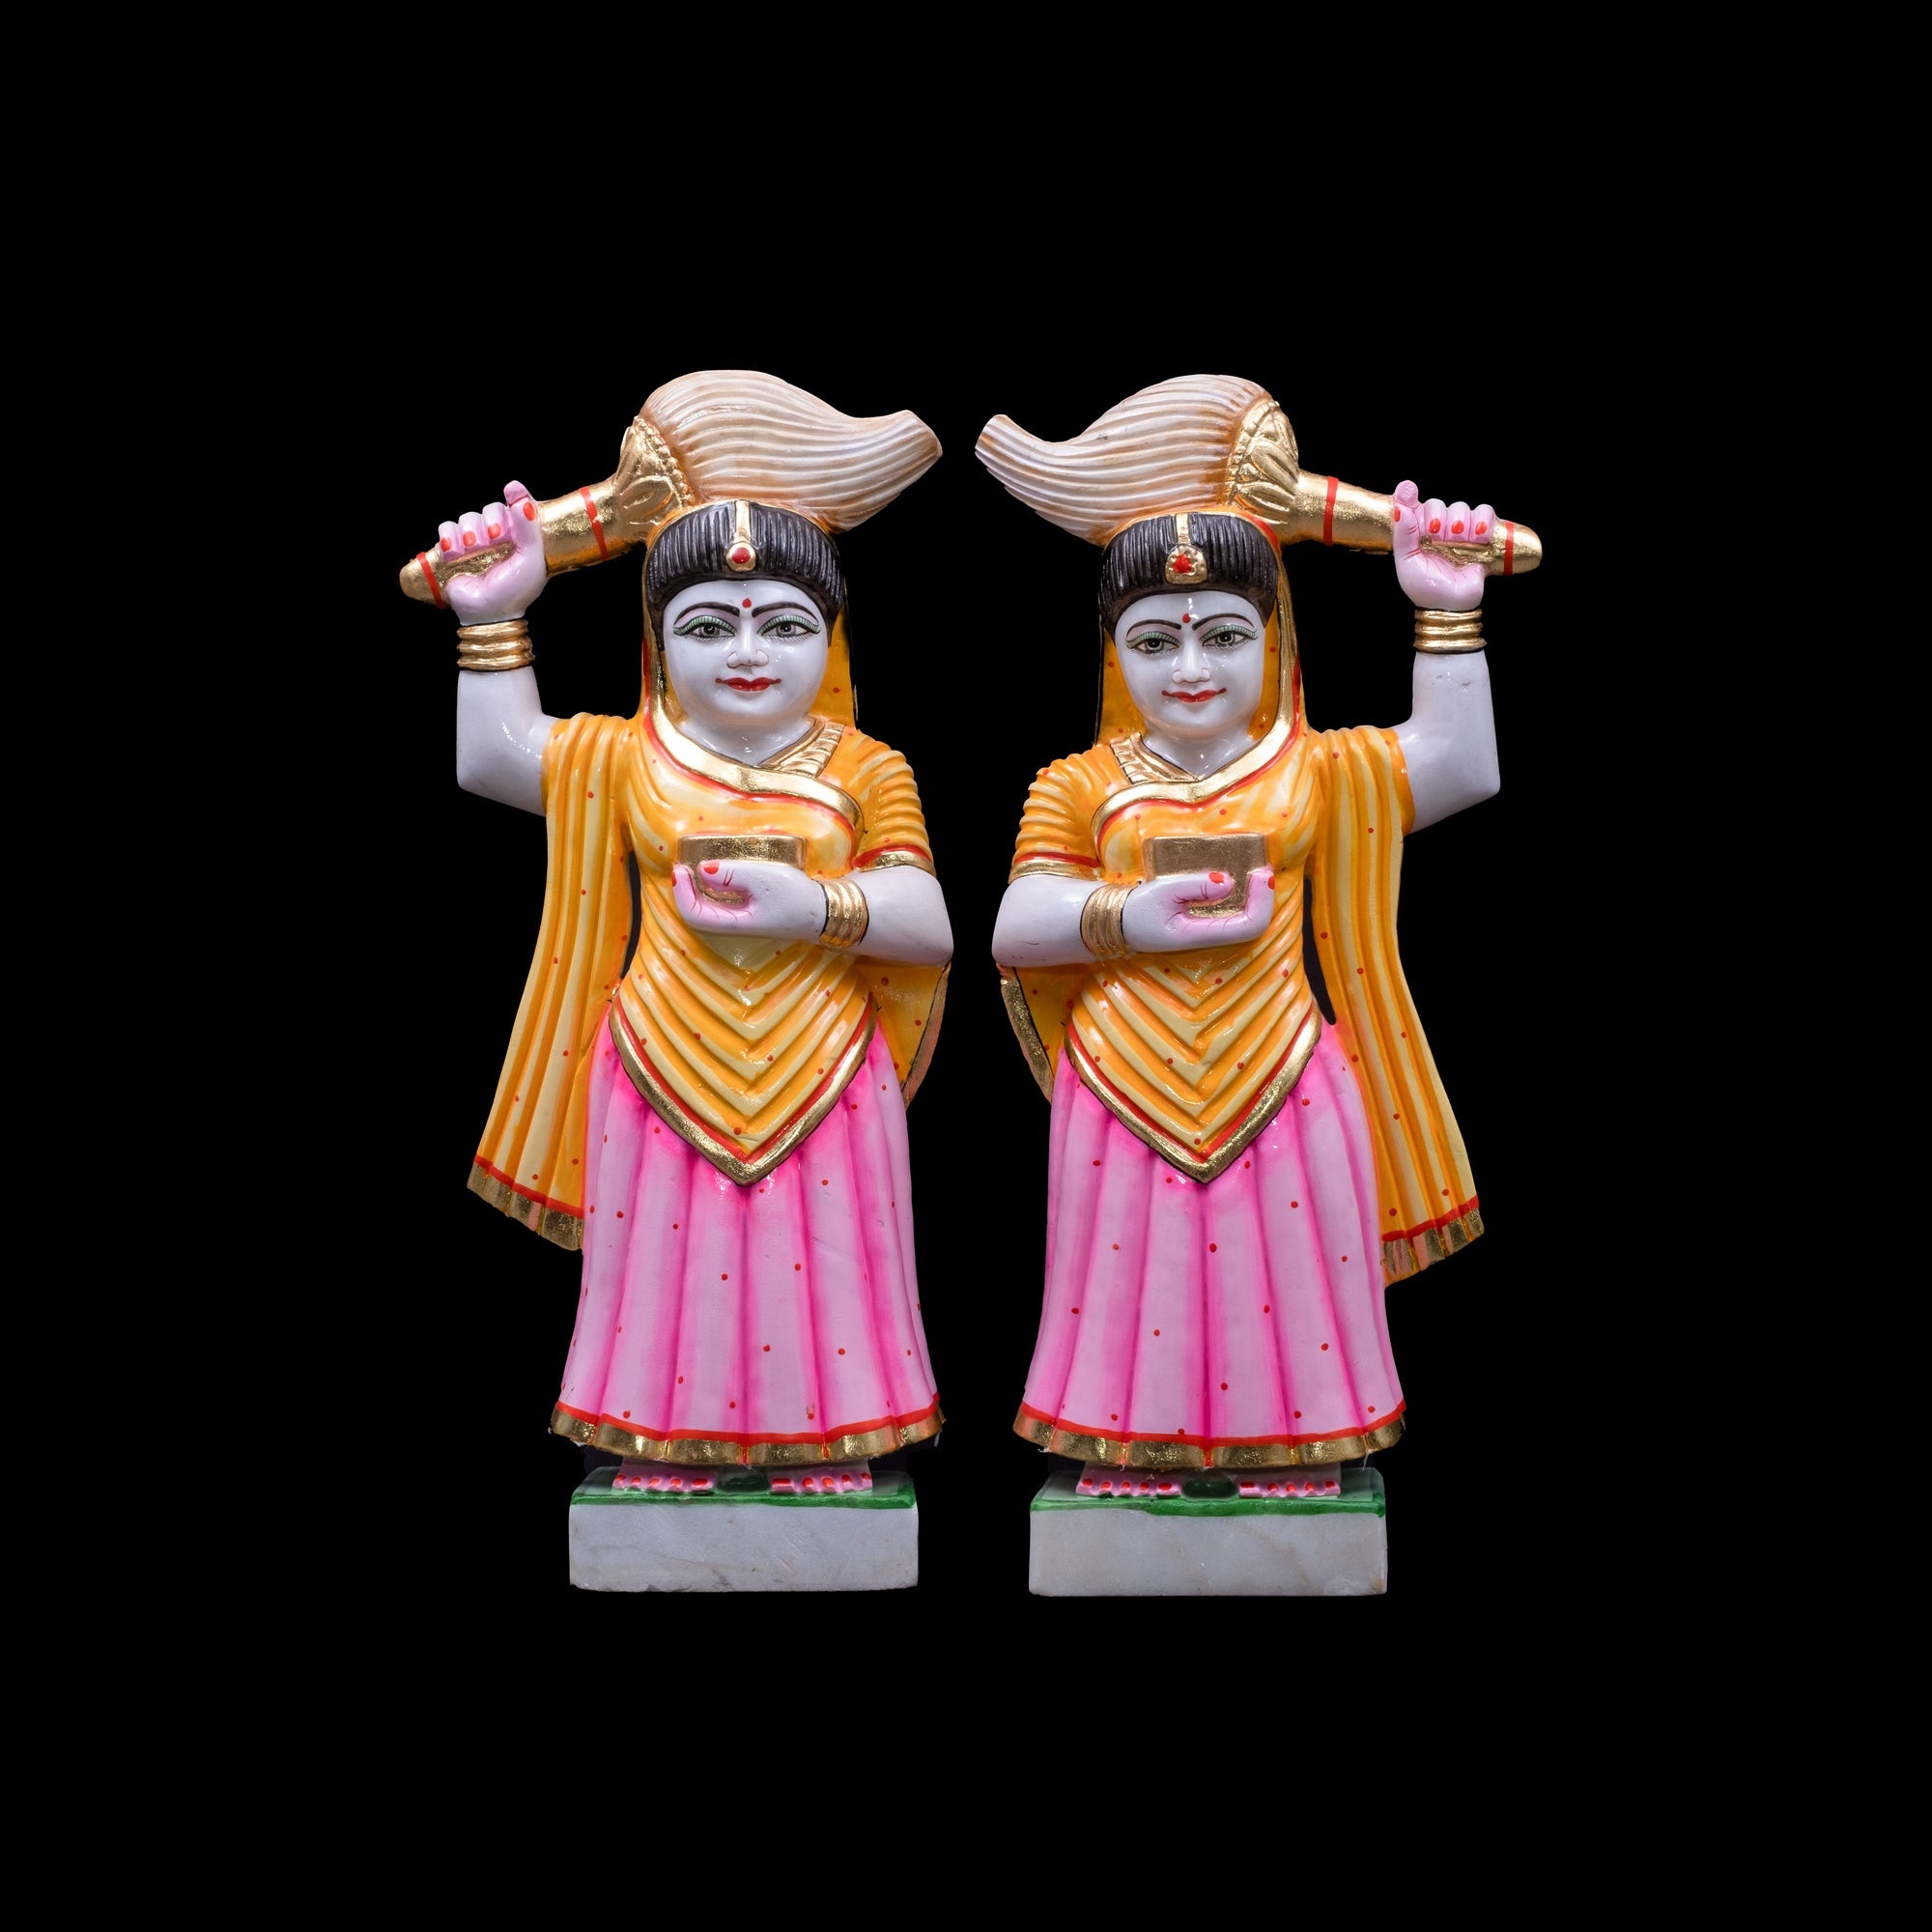 Riddhi Siddhi Marble Statue (Pink and yellow) - 26 x 12 x 5 inches